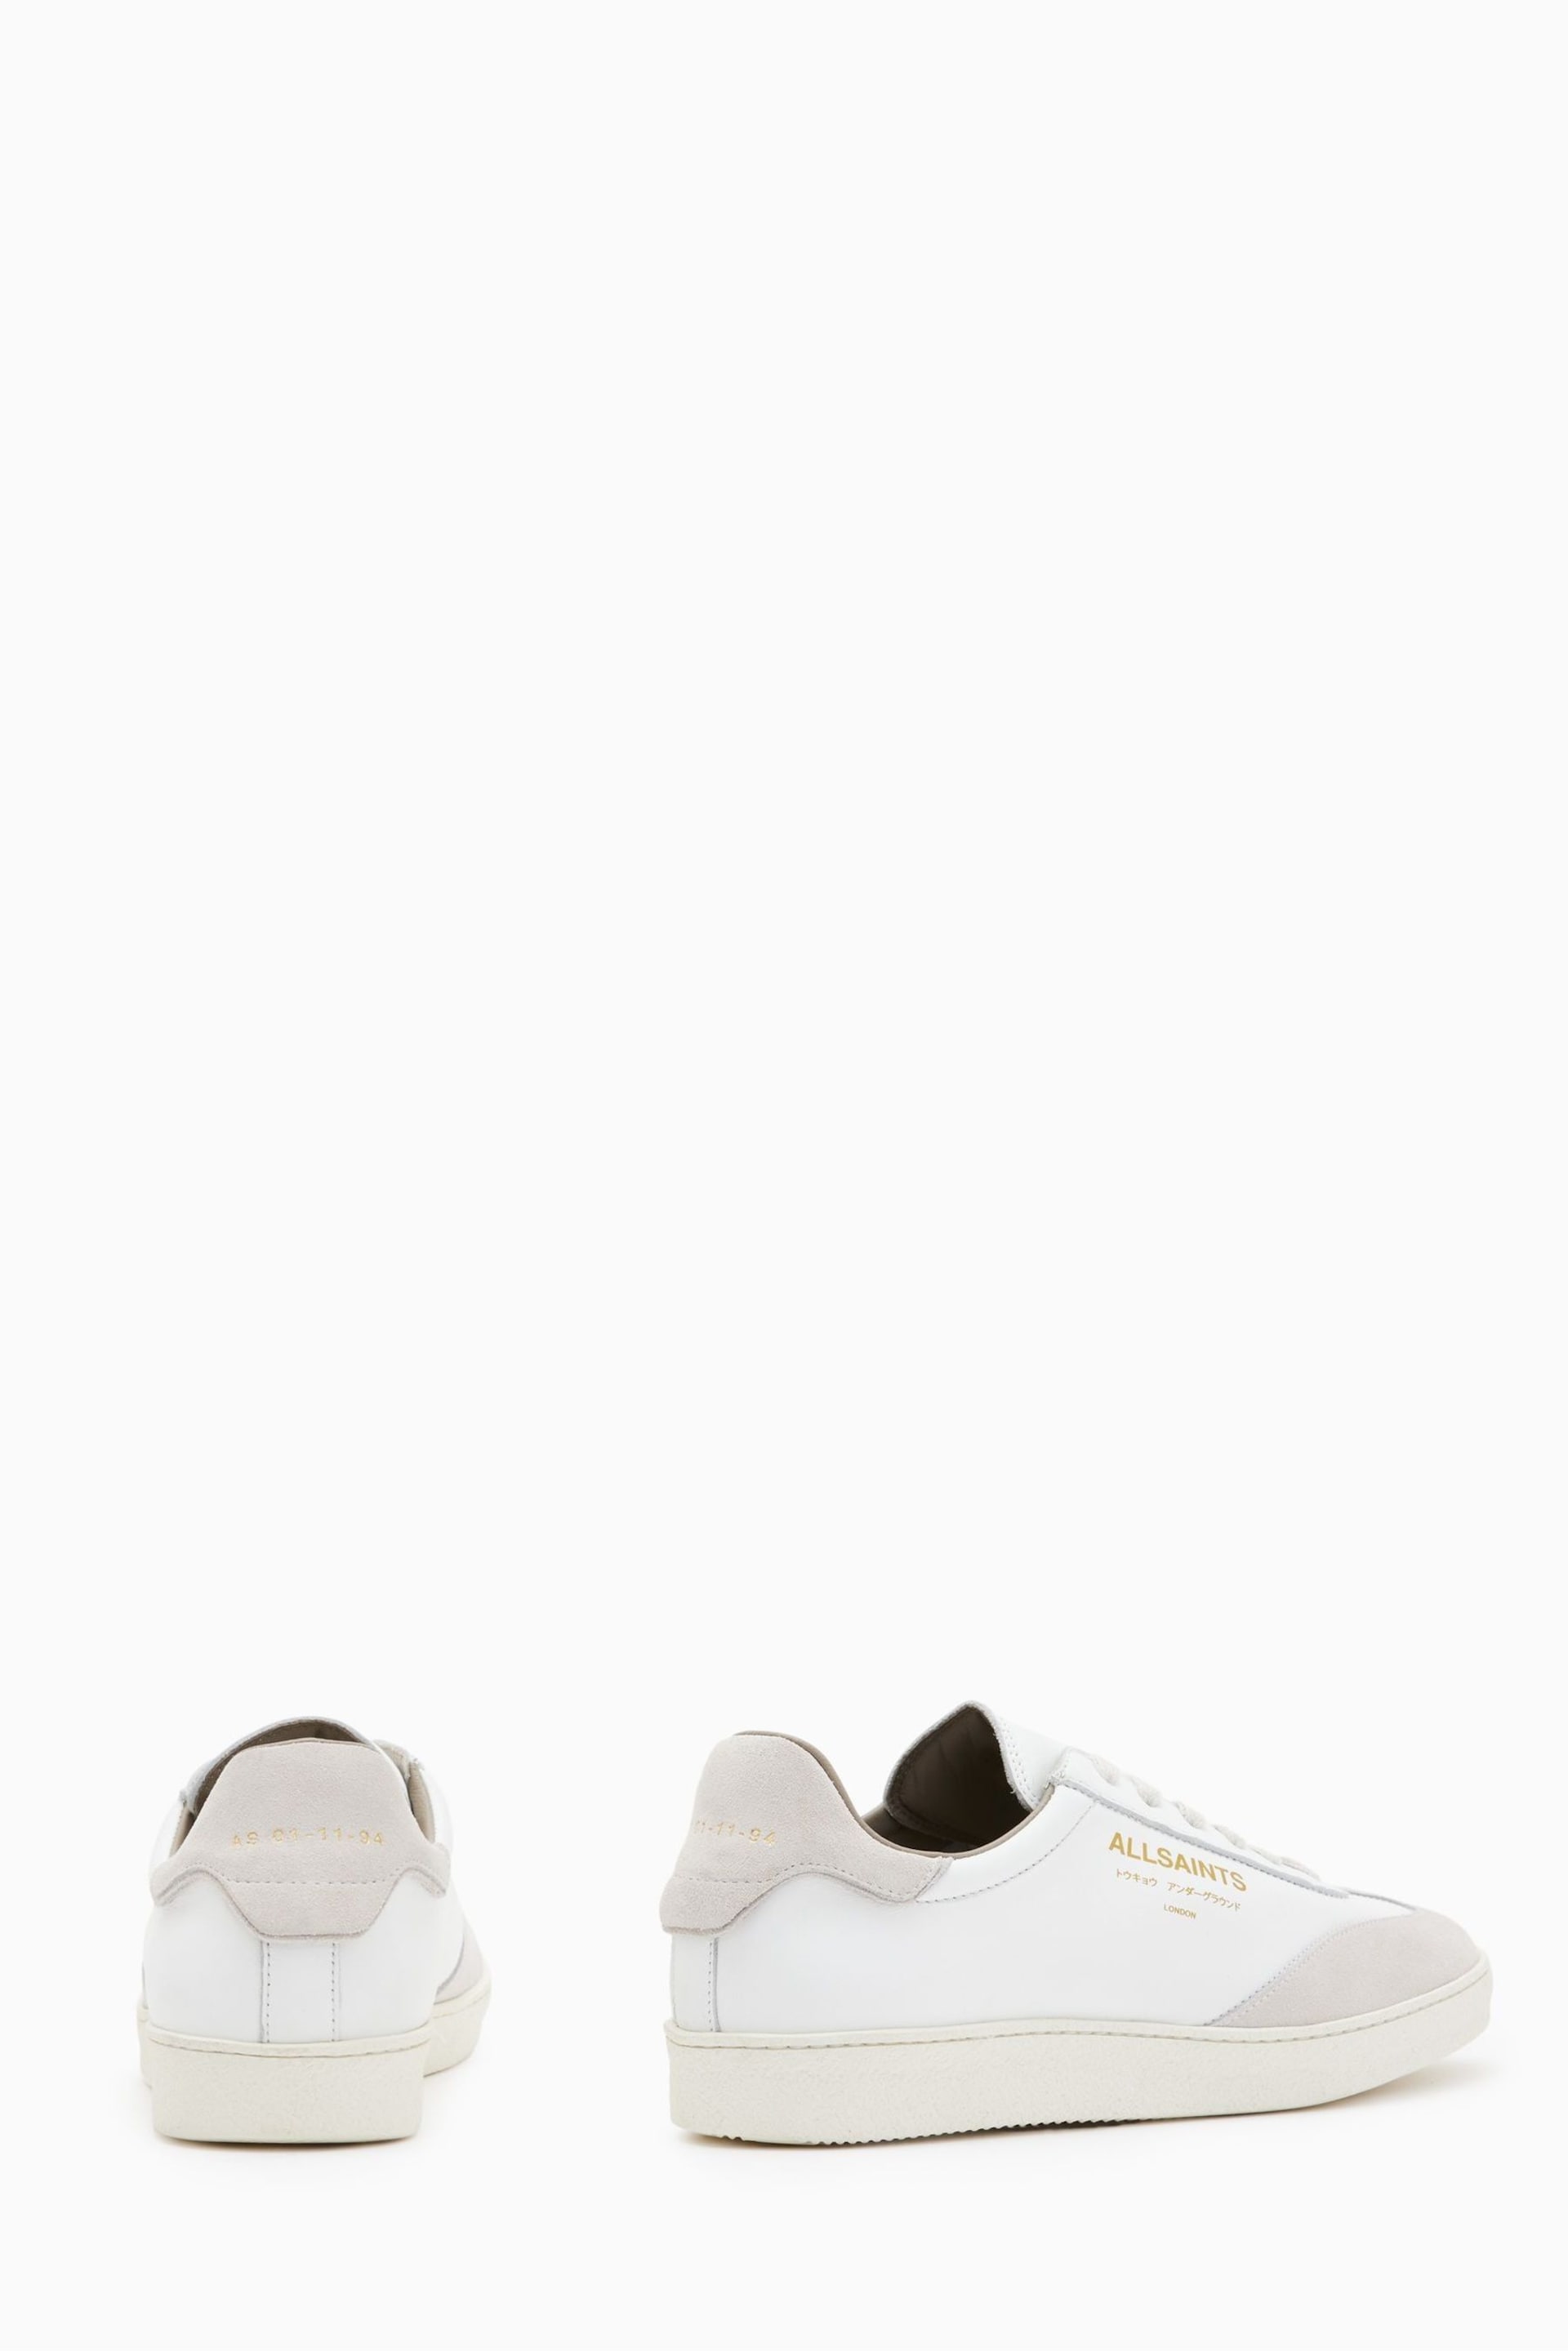 AllSaints White Thelma Sneakers - Image 3 of 5